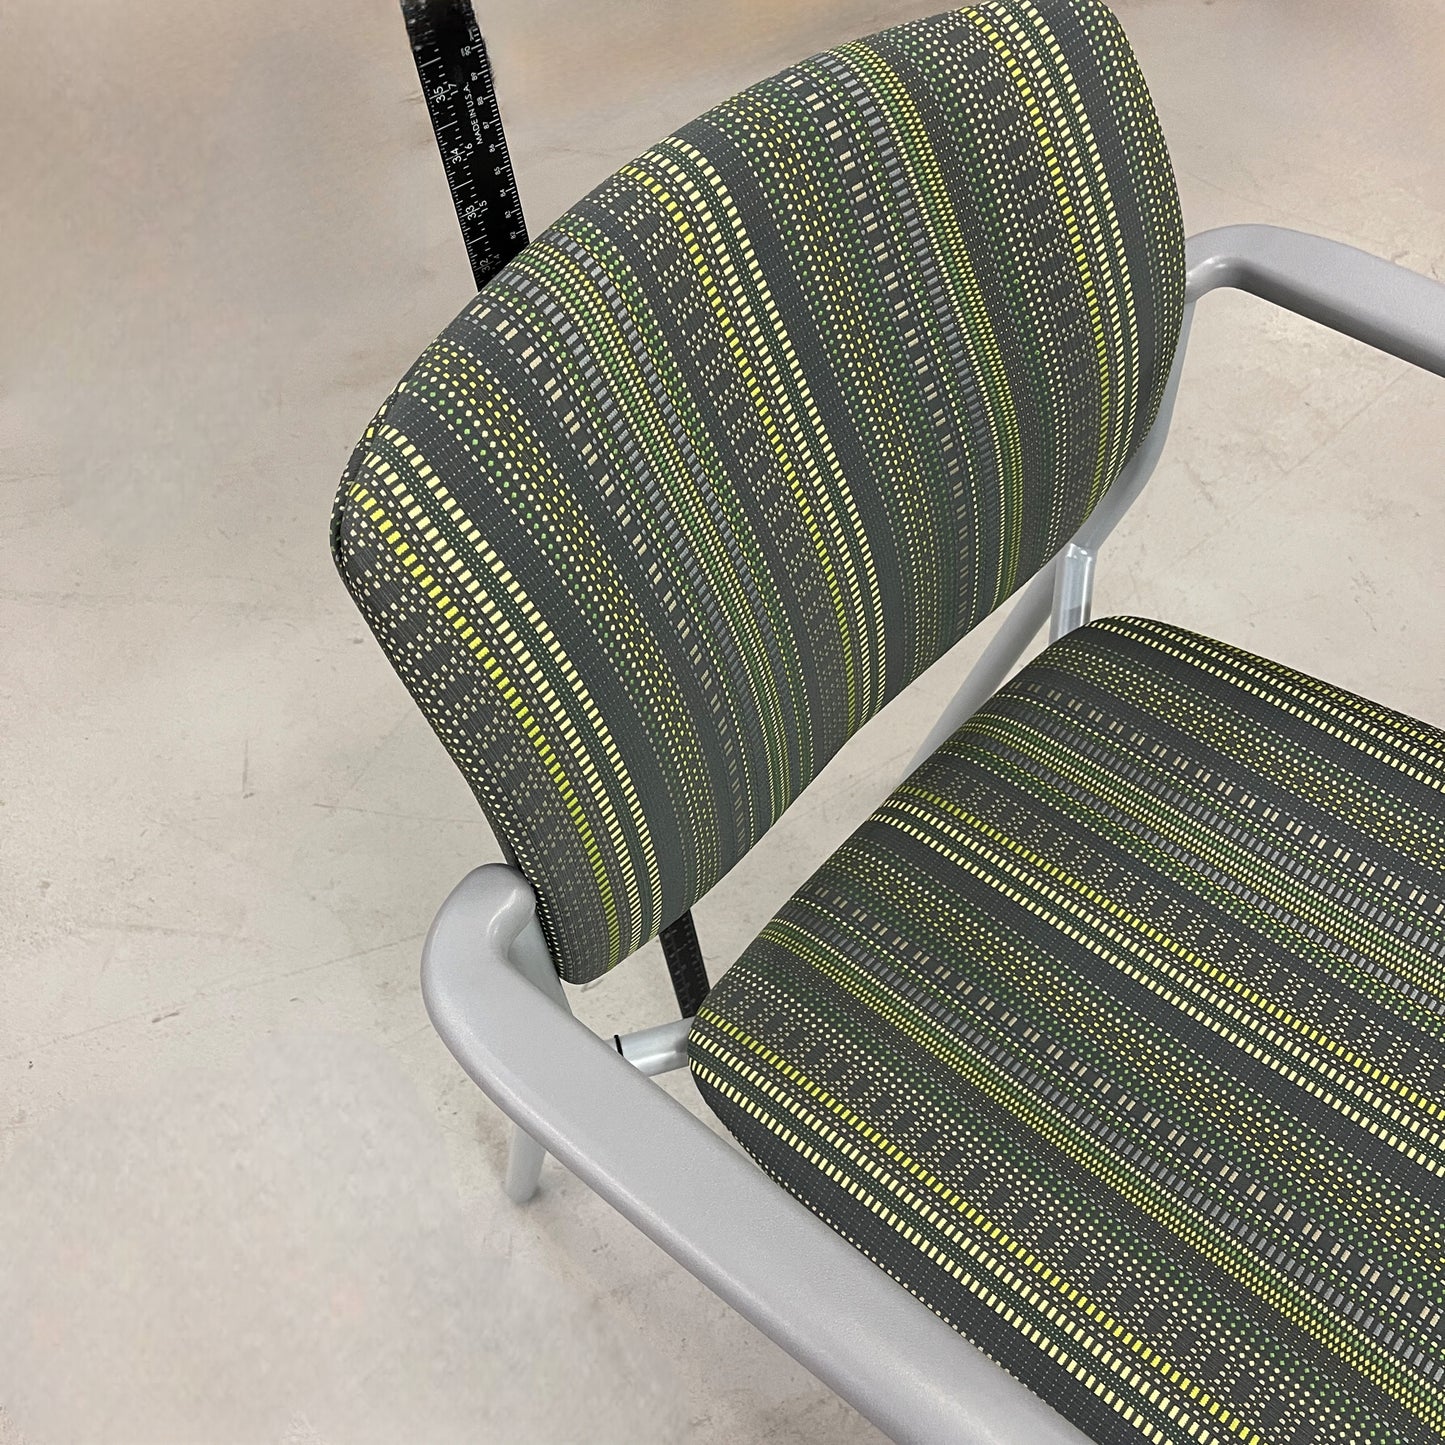 SITONIT Seating Low Back Stationary Upholstered Side Chair Freelance 350 LB Green Pattern (New)